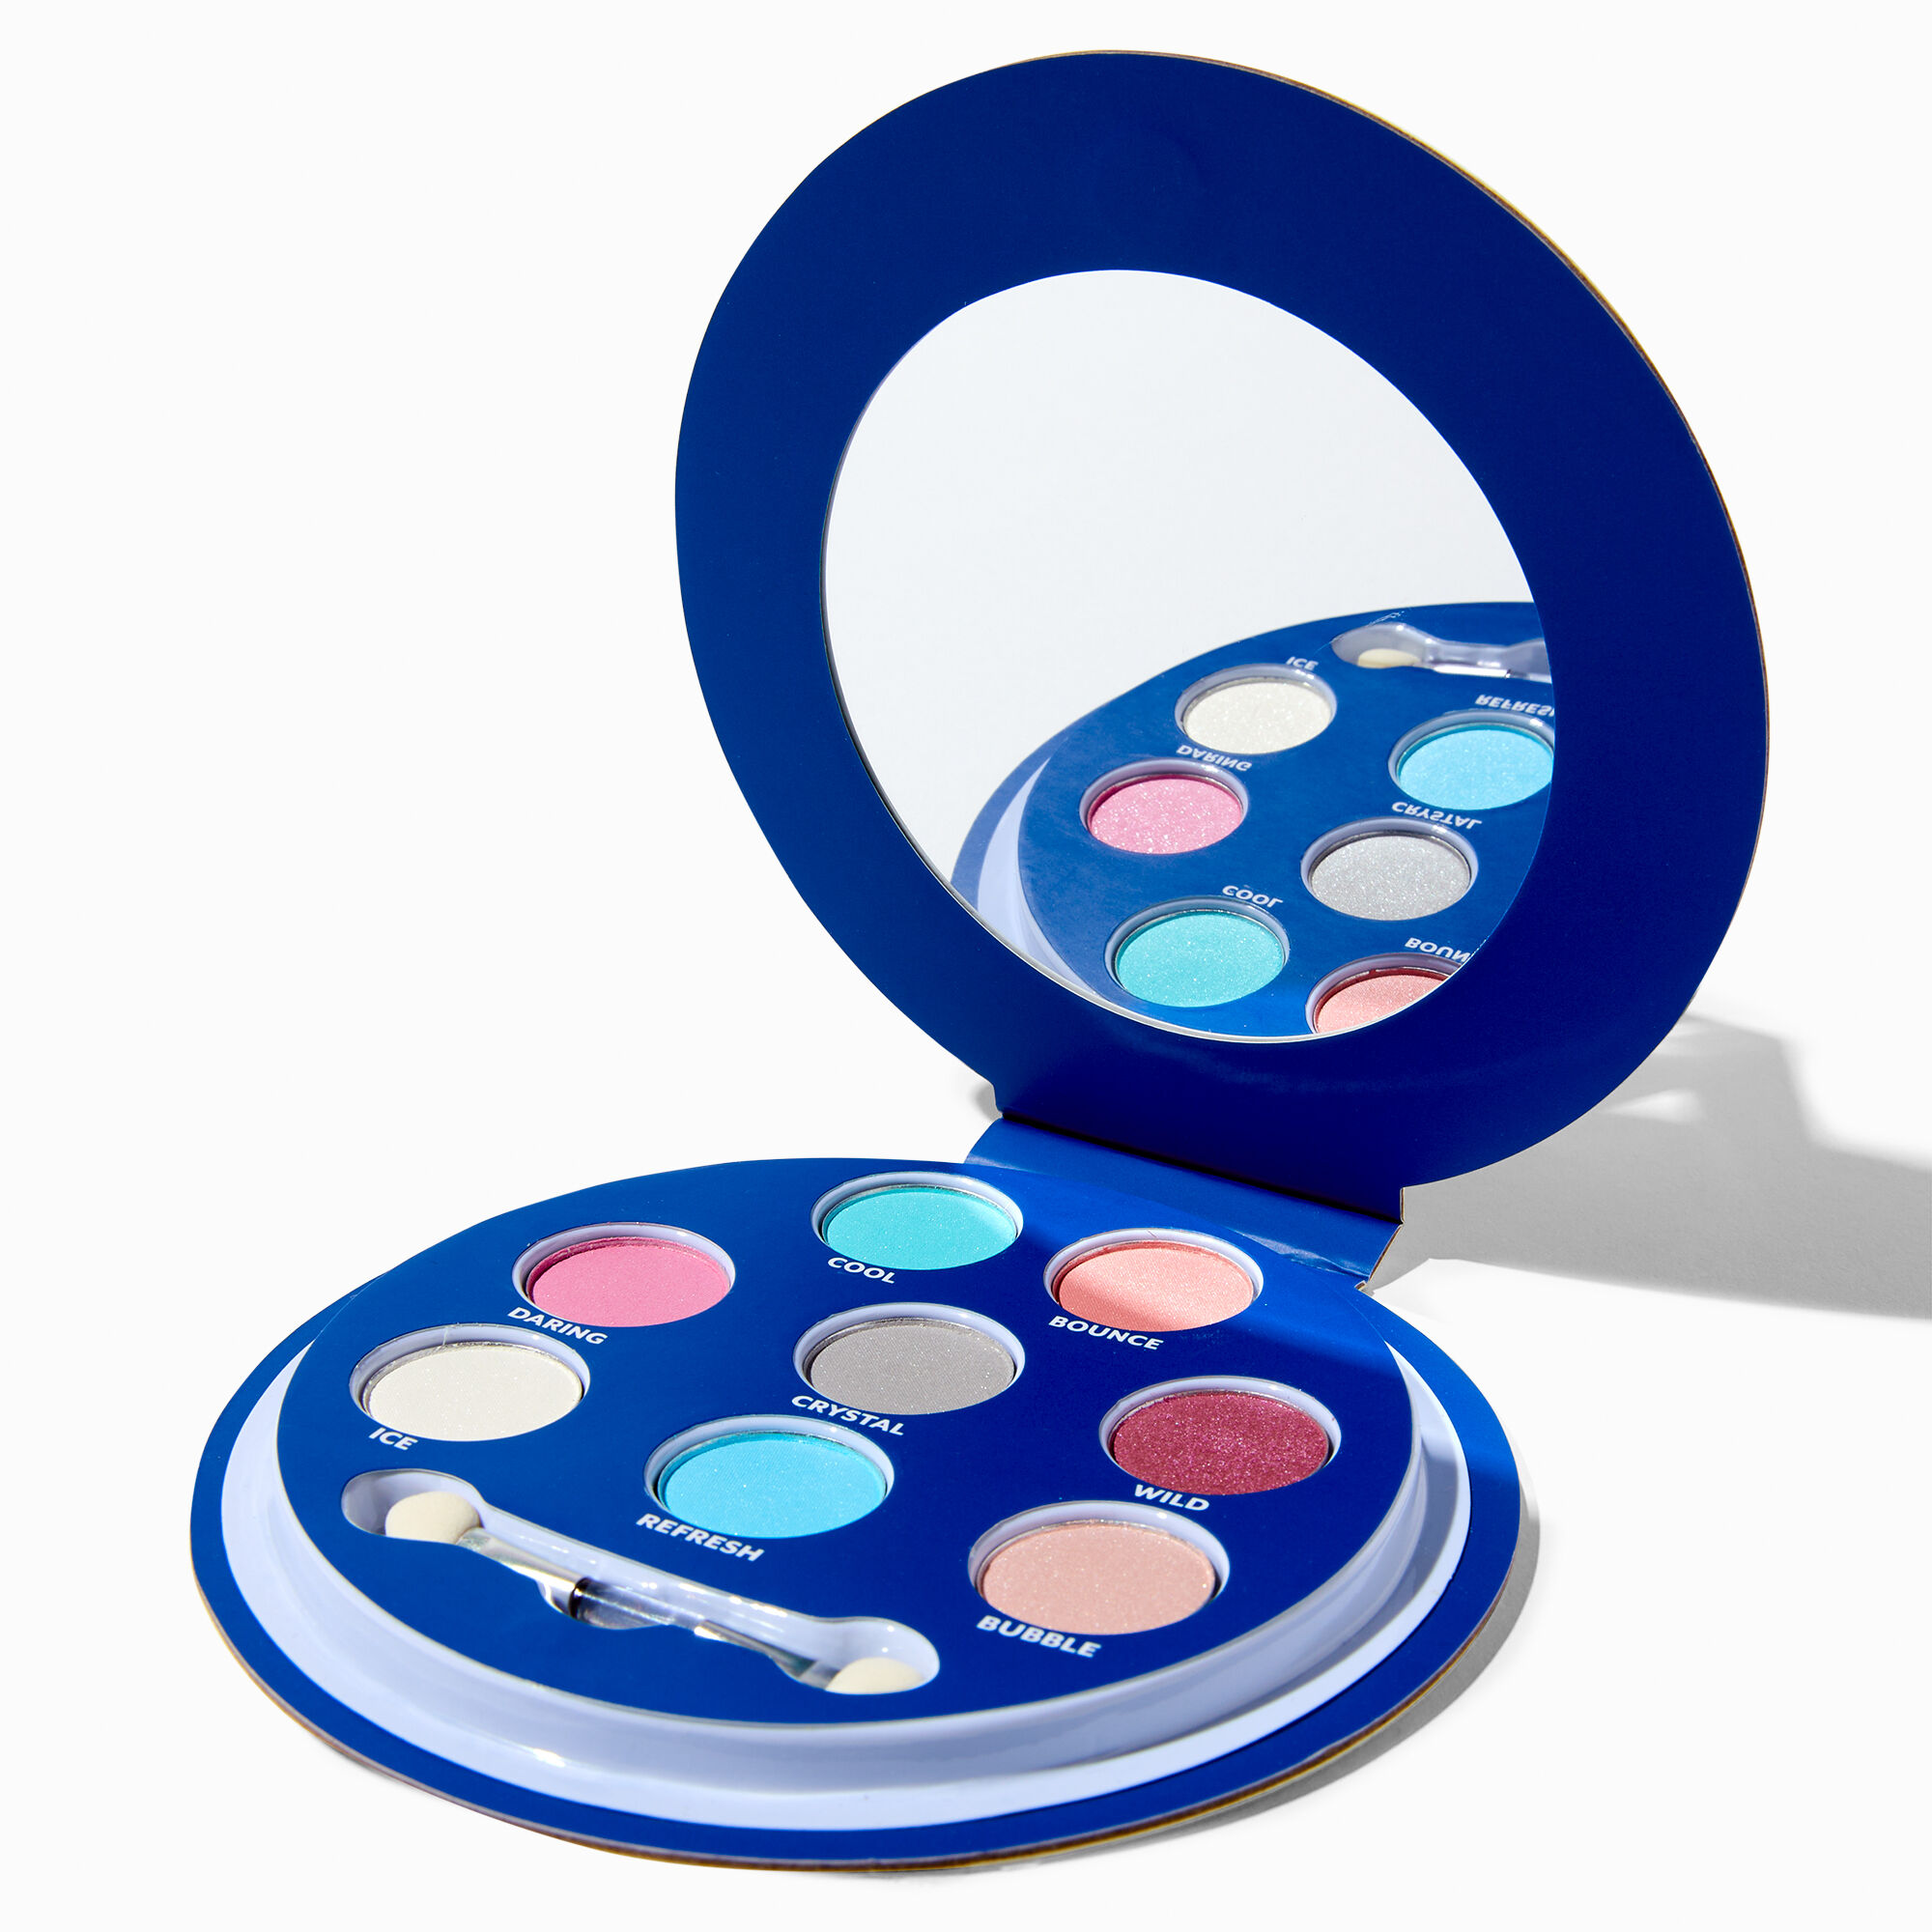 View Pepsi Claires Exclusive Eyeshadow Palette information